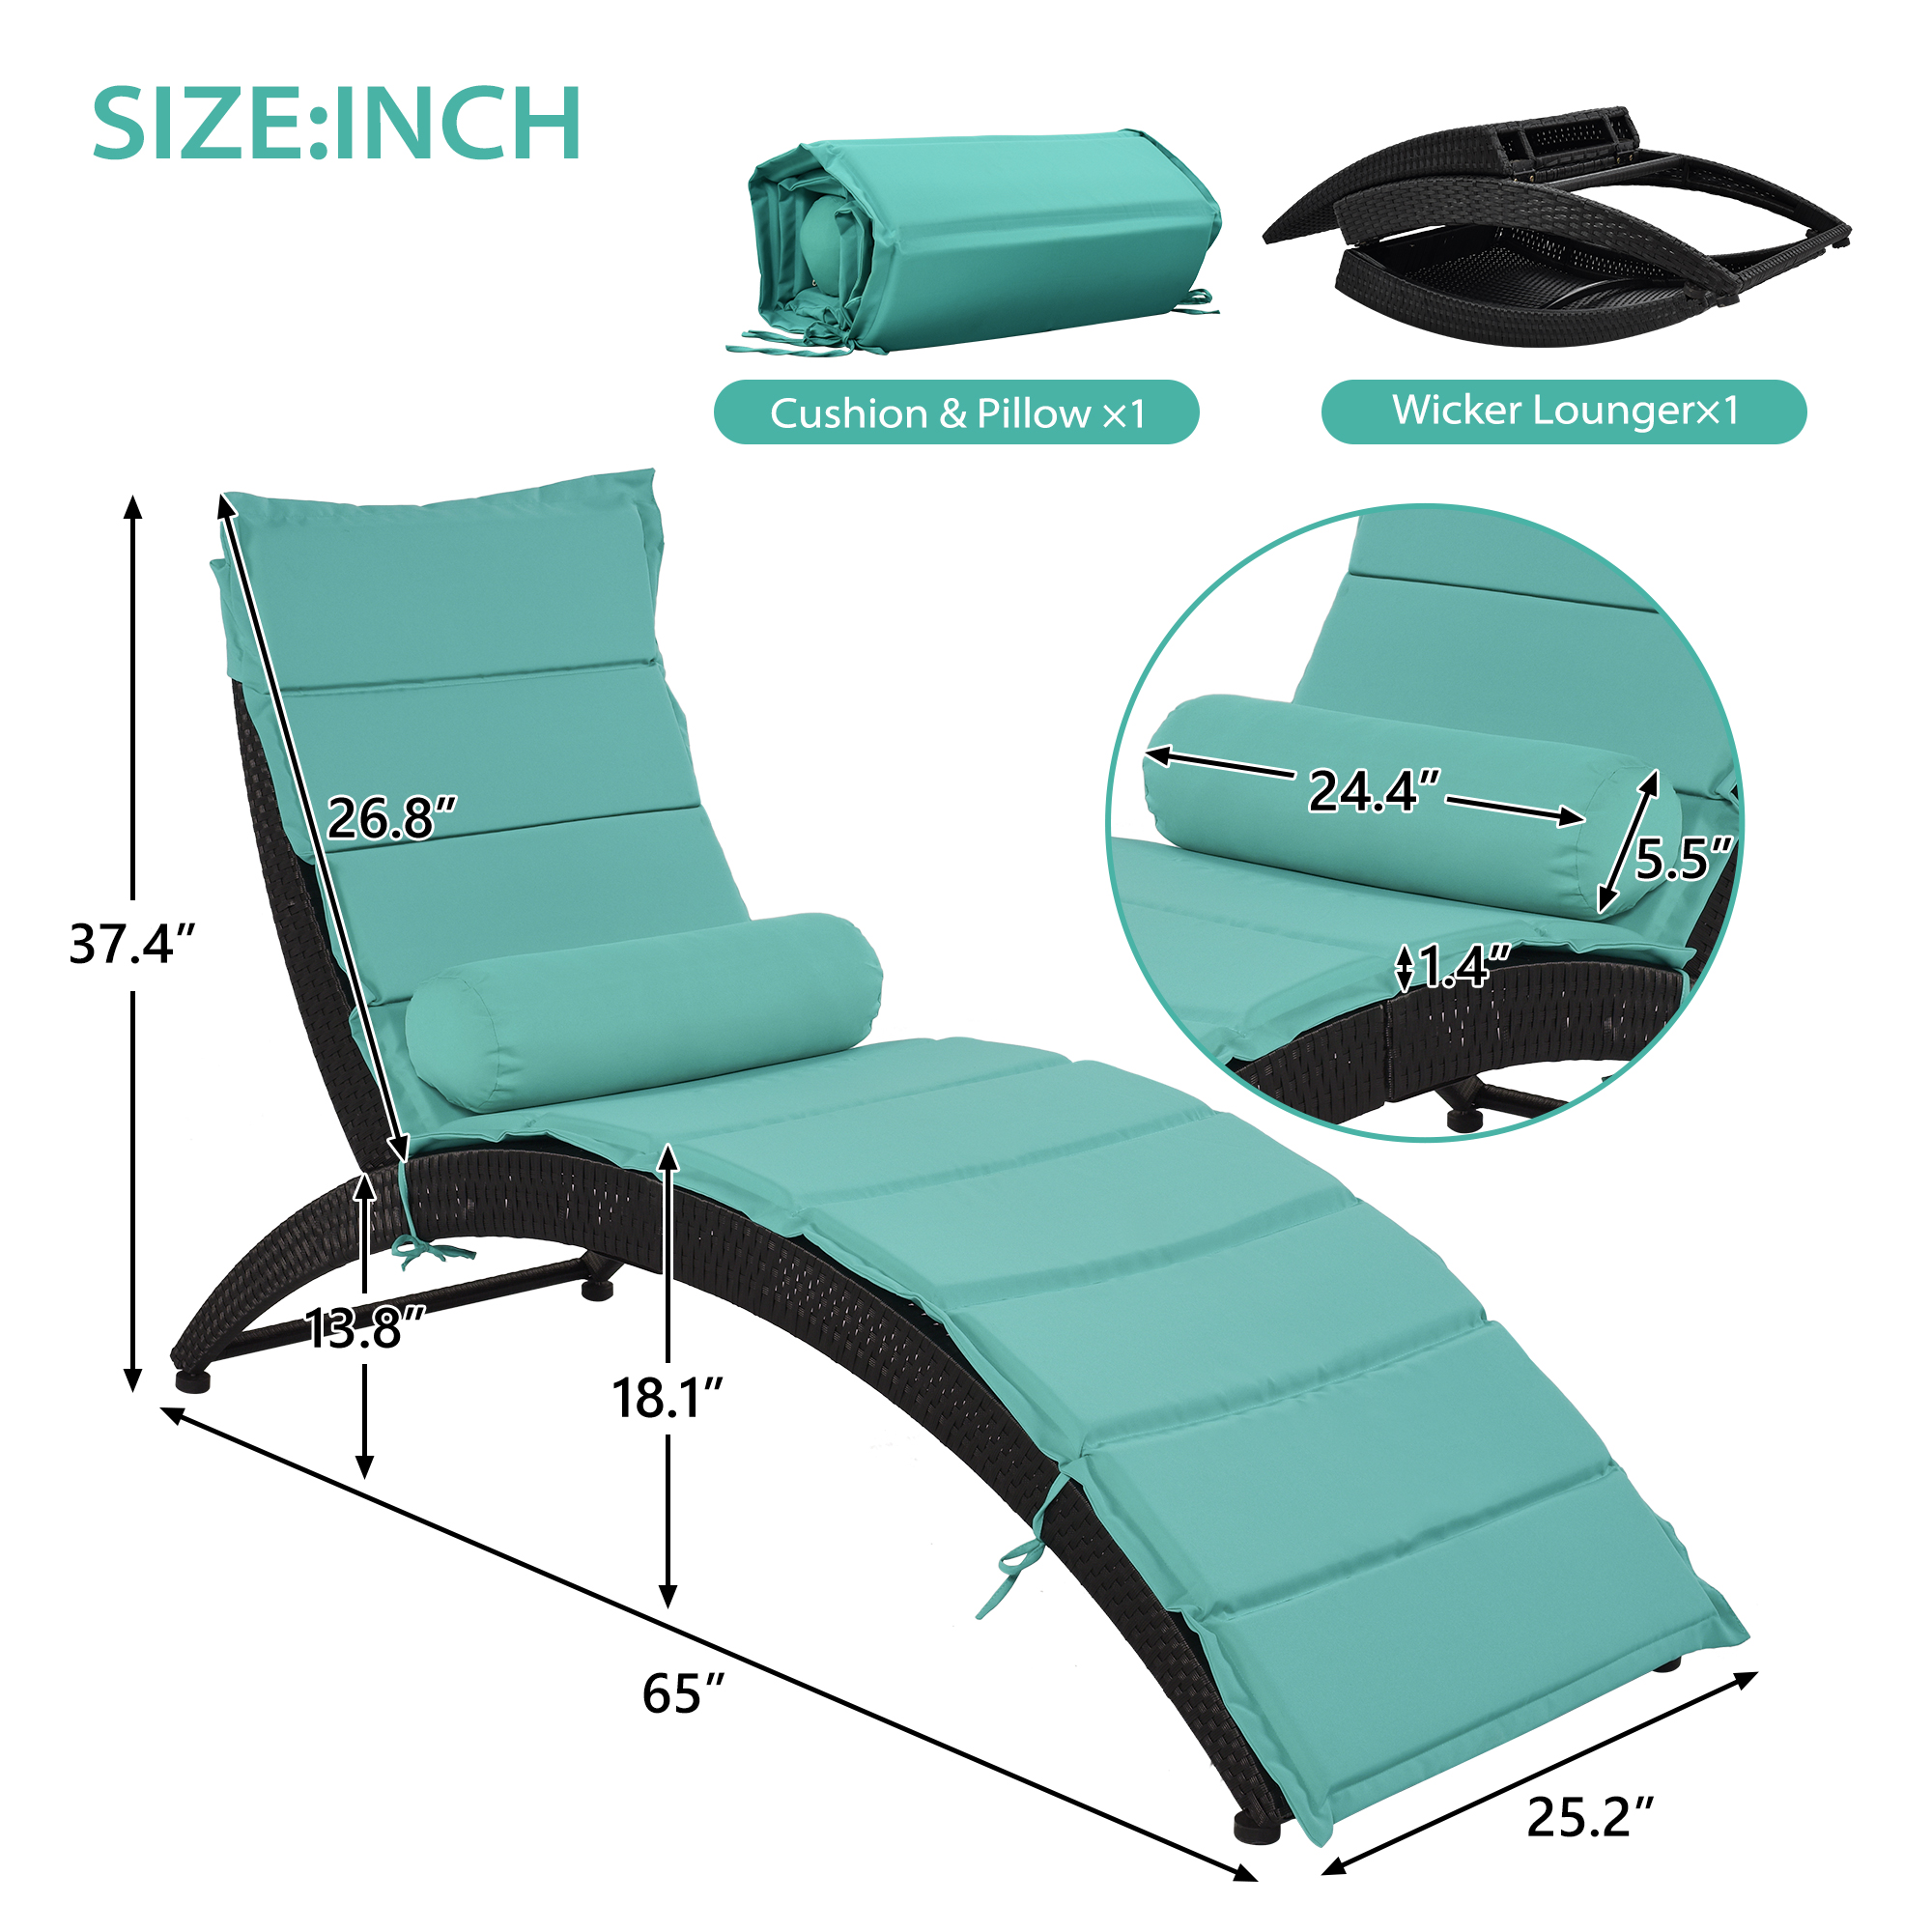 Patio Chaise Lounge, Reclining Camping Chair, PE Rattan Sun Recliner Chair with Seat Cushion, Poolside Garden Outdoor Chaise Lounge Chairs, JA1099 - image 3 of 8